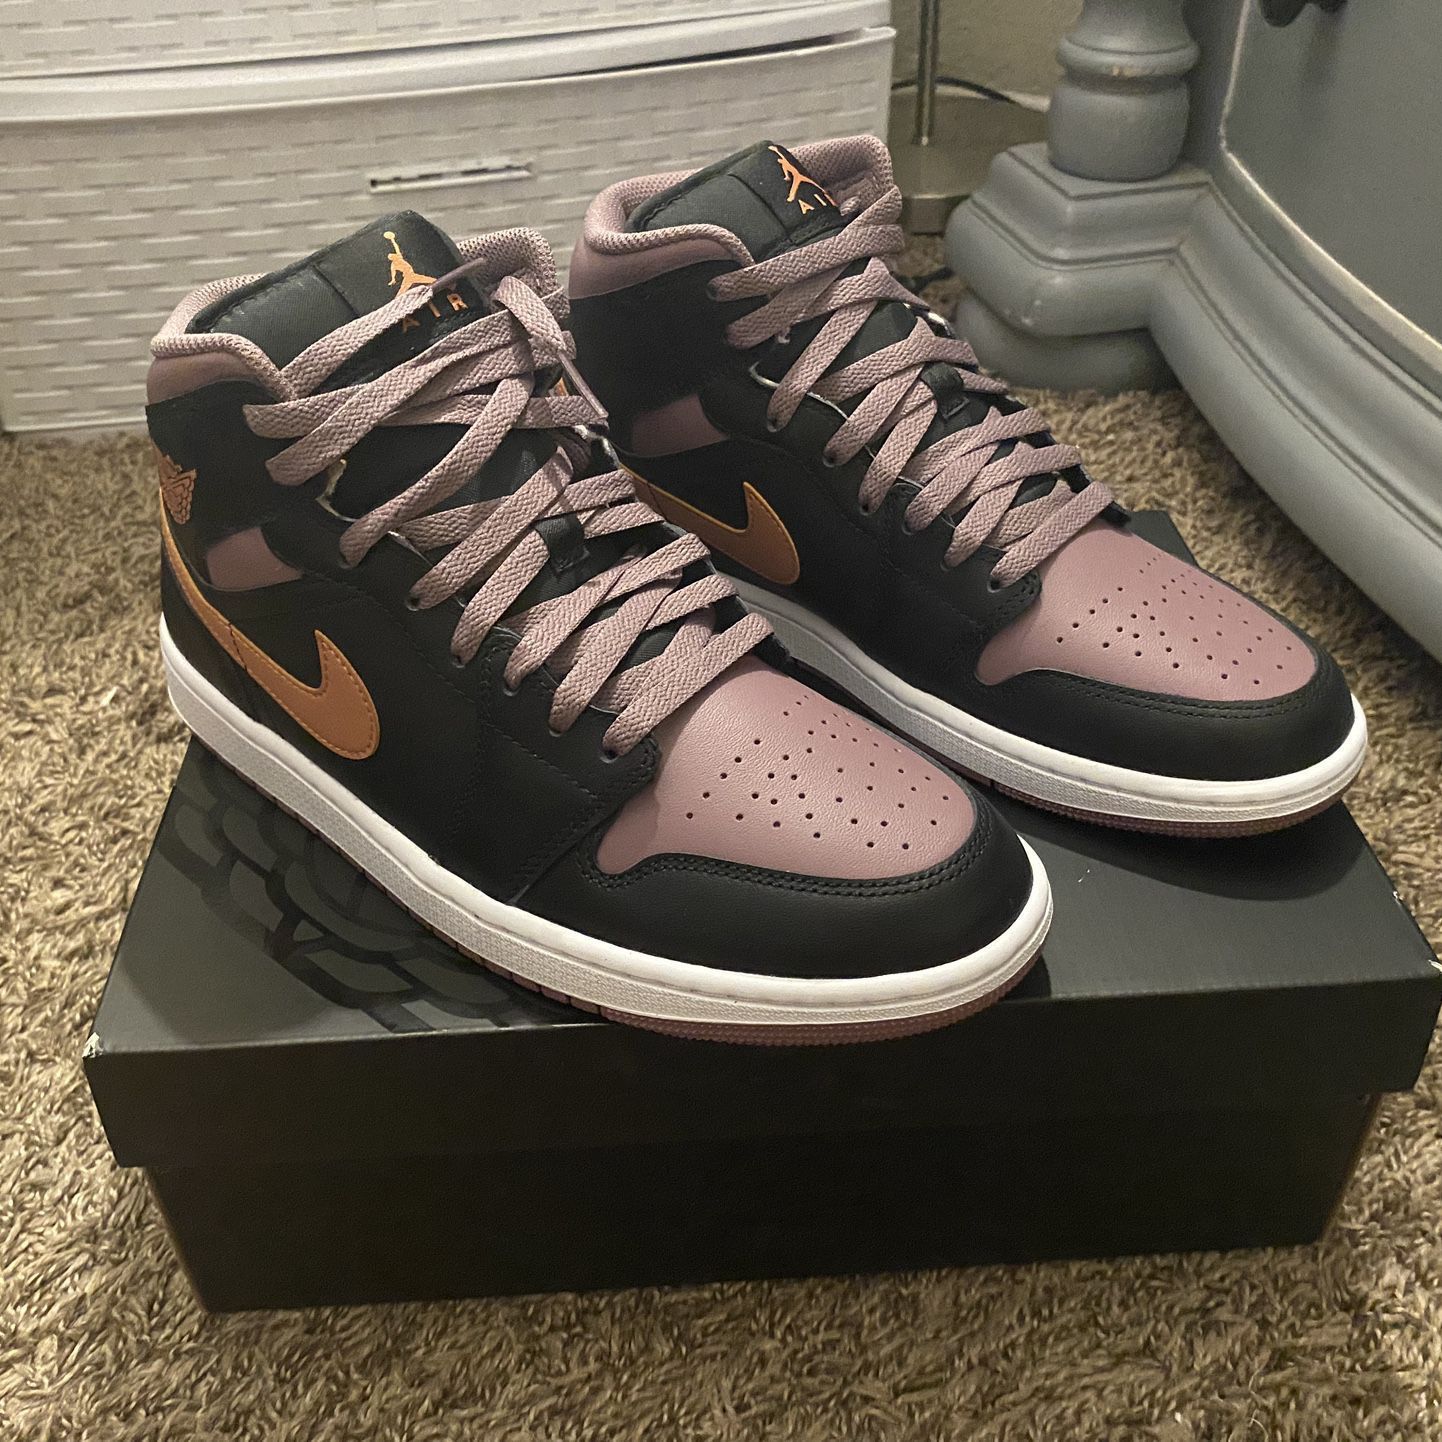 Air Jordan 1 Mid SE (Text Me, Im Just Trying To Get Rid Of Them)